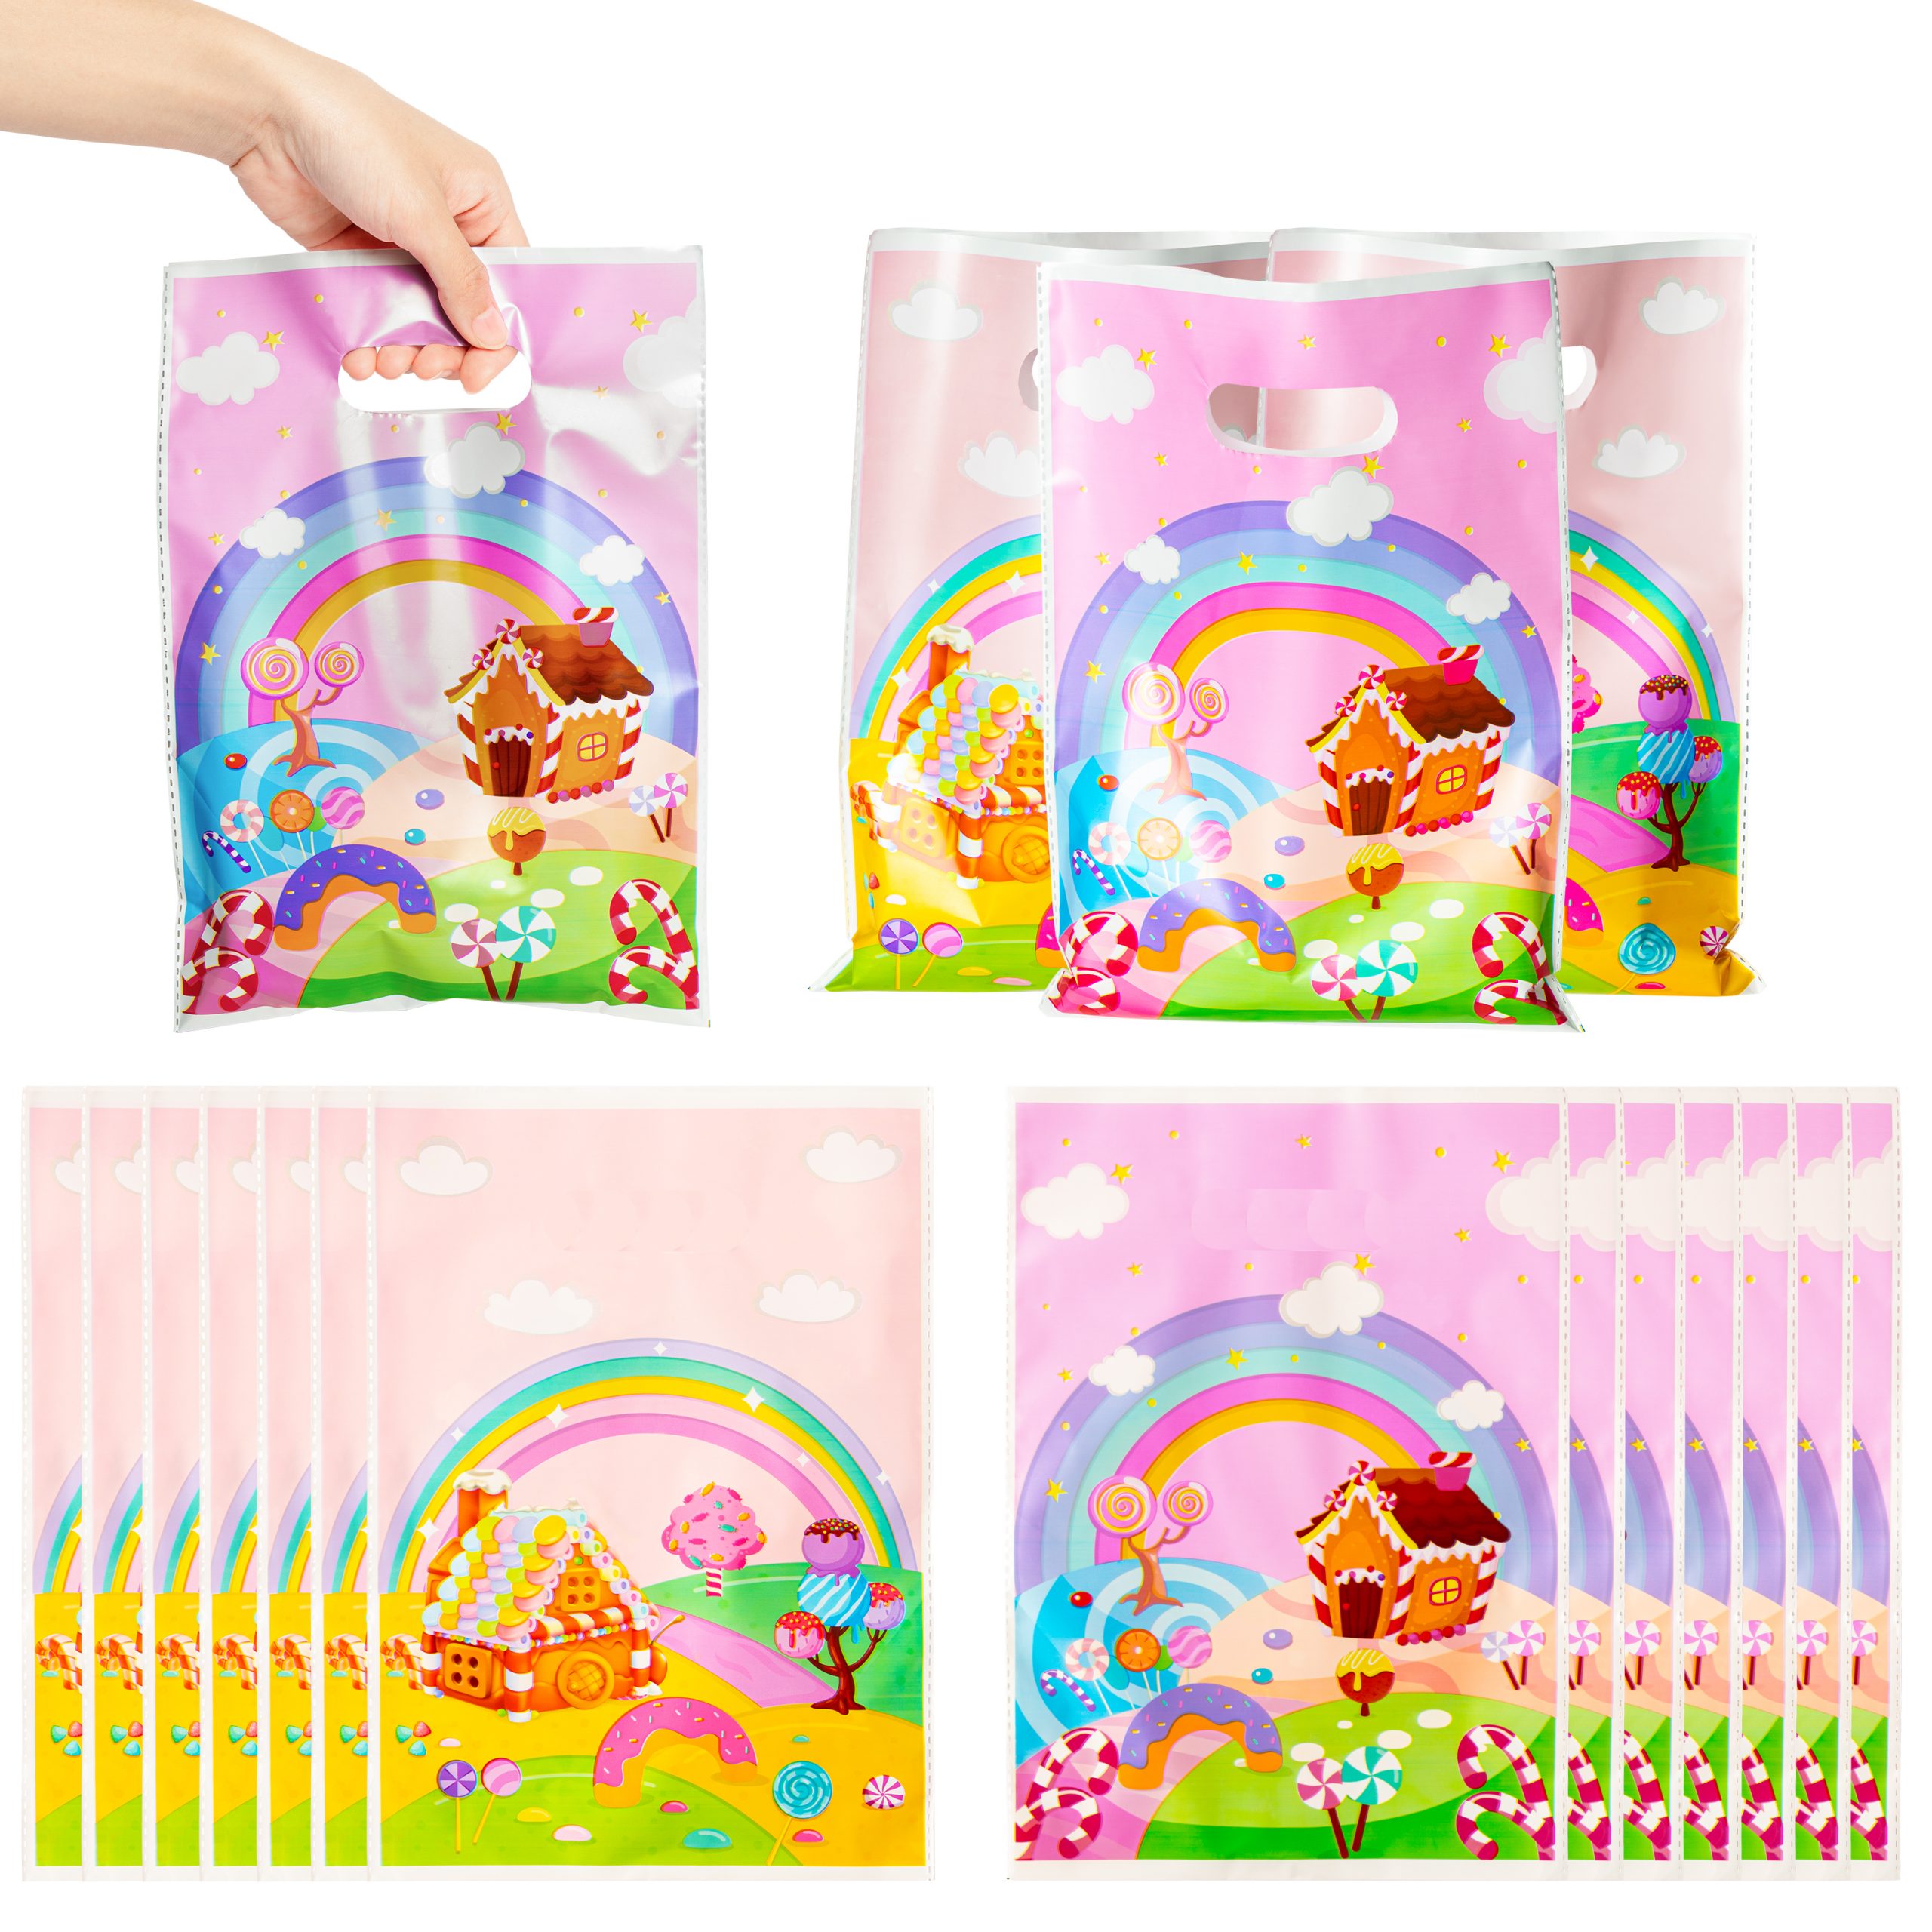 ArowlWesh 50Pcs Candyland Party Favor Bags Plastic Goodie Favor Bags for  Birthday Party Candy Treat Bags with Handles Birthday Snack Bags Cute  Goodie Bags for Kids Birthday Baby Shower Graduations – ArowlWesh